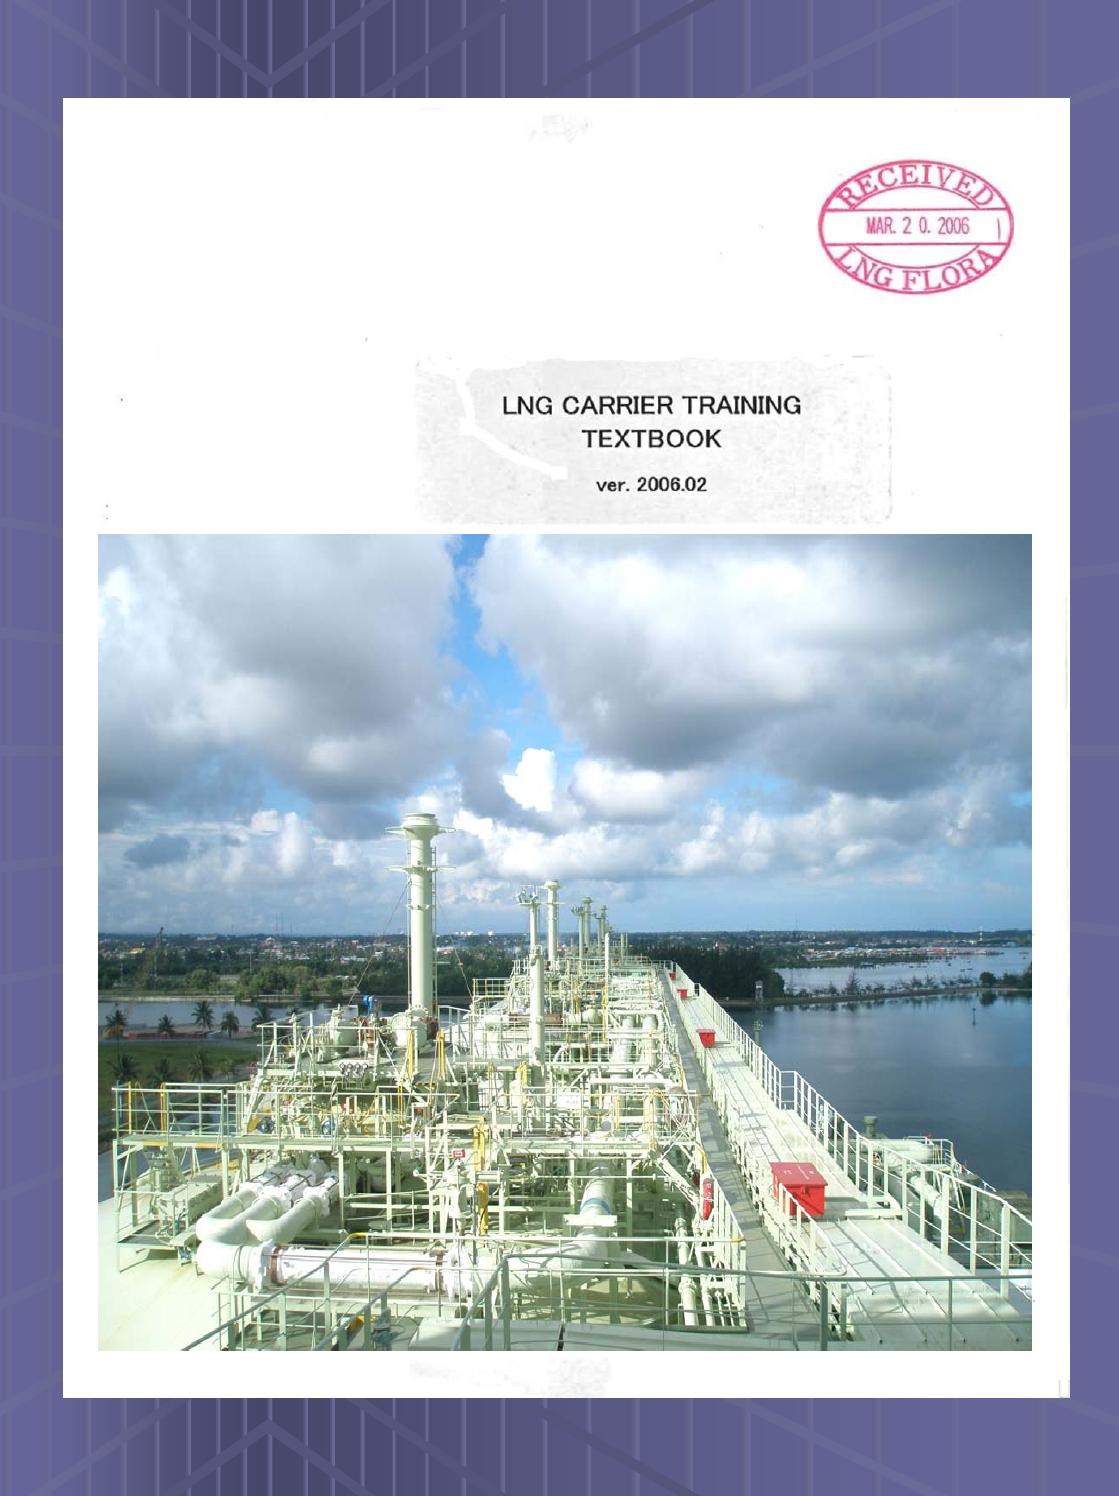 LNG Carrier train textbook by Unknown